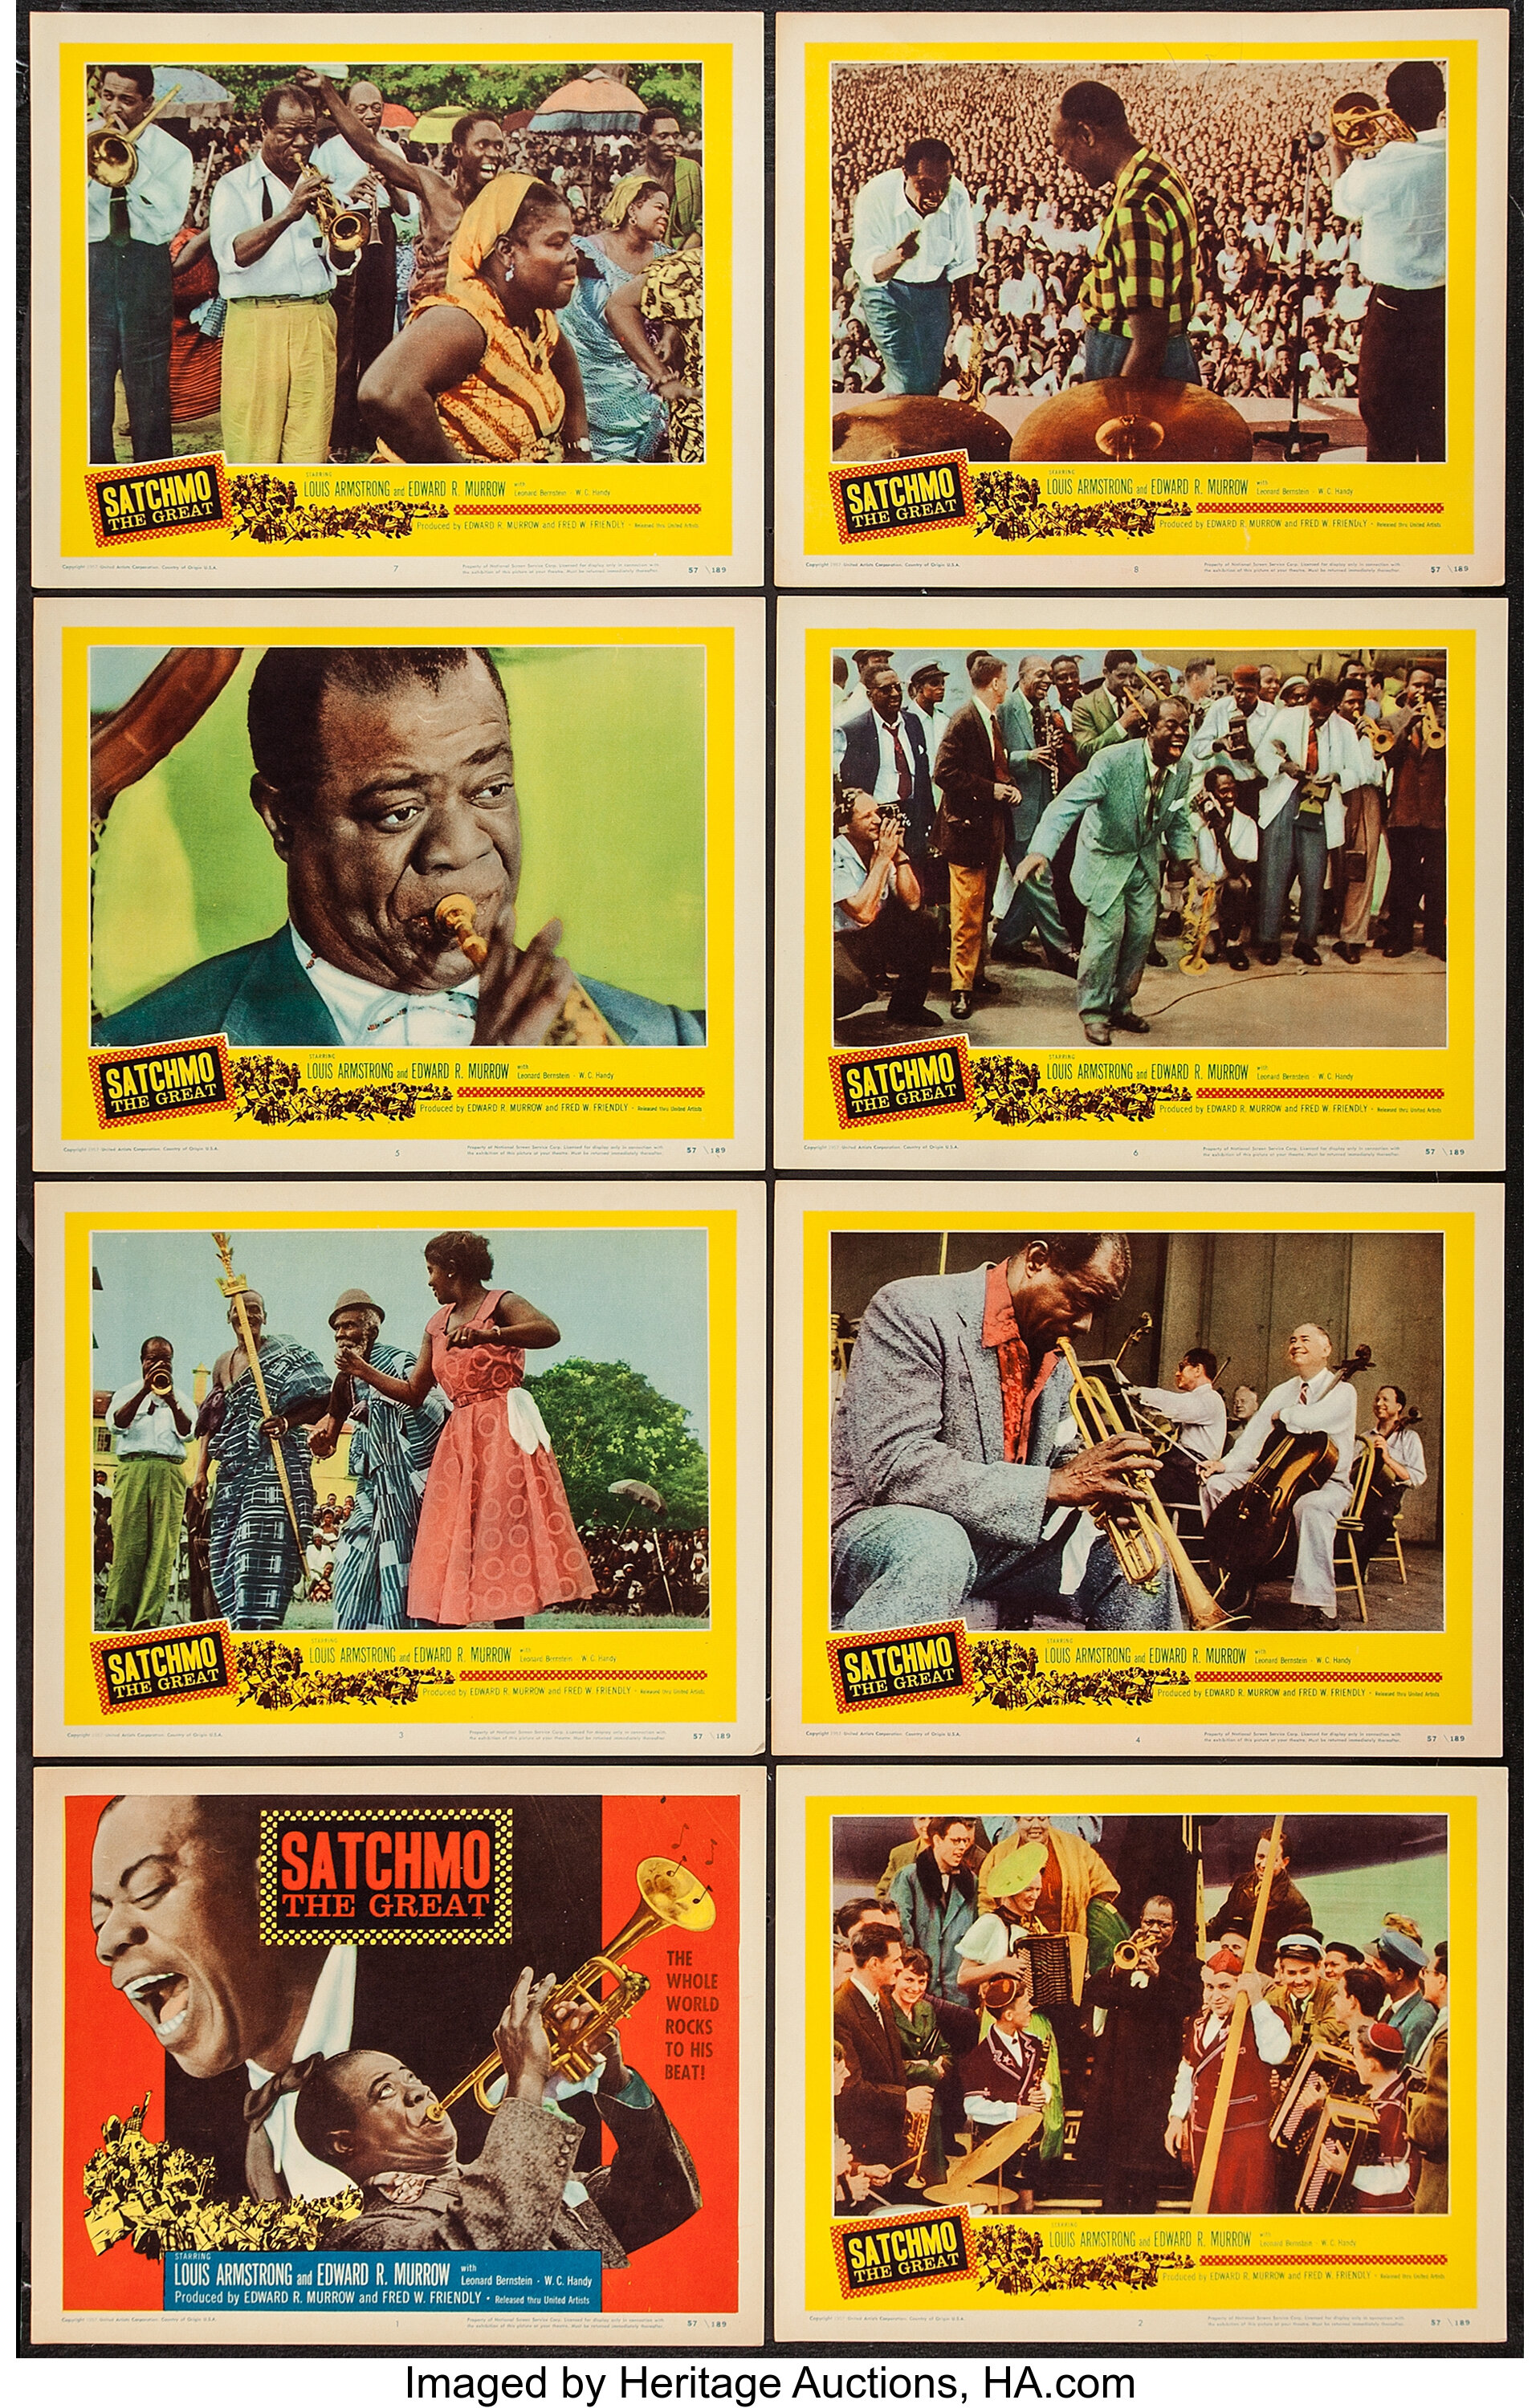 Satchmo The Great United Artists 1957 Lobby Card Set Of 8 11 Lot 52264 Heritage Auctions 0527